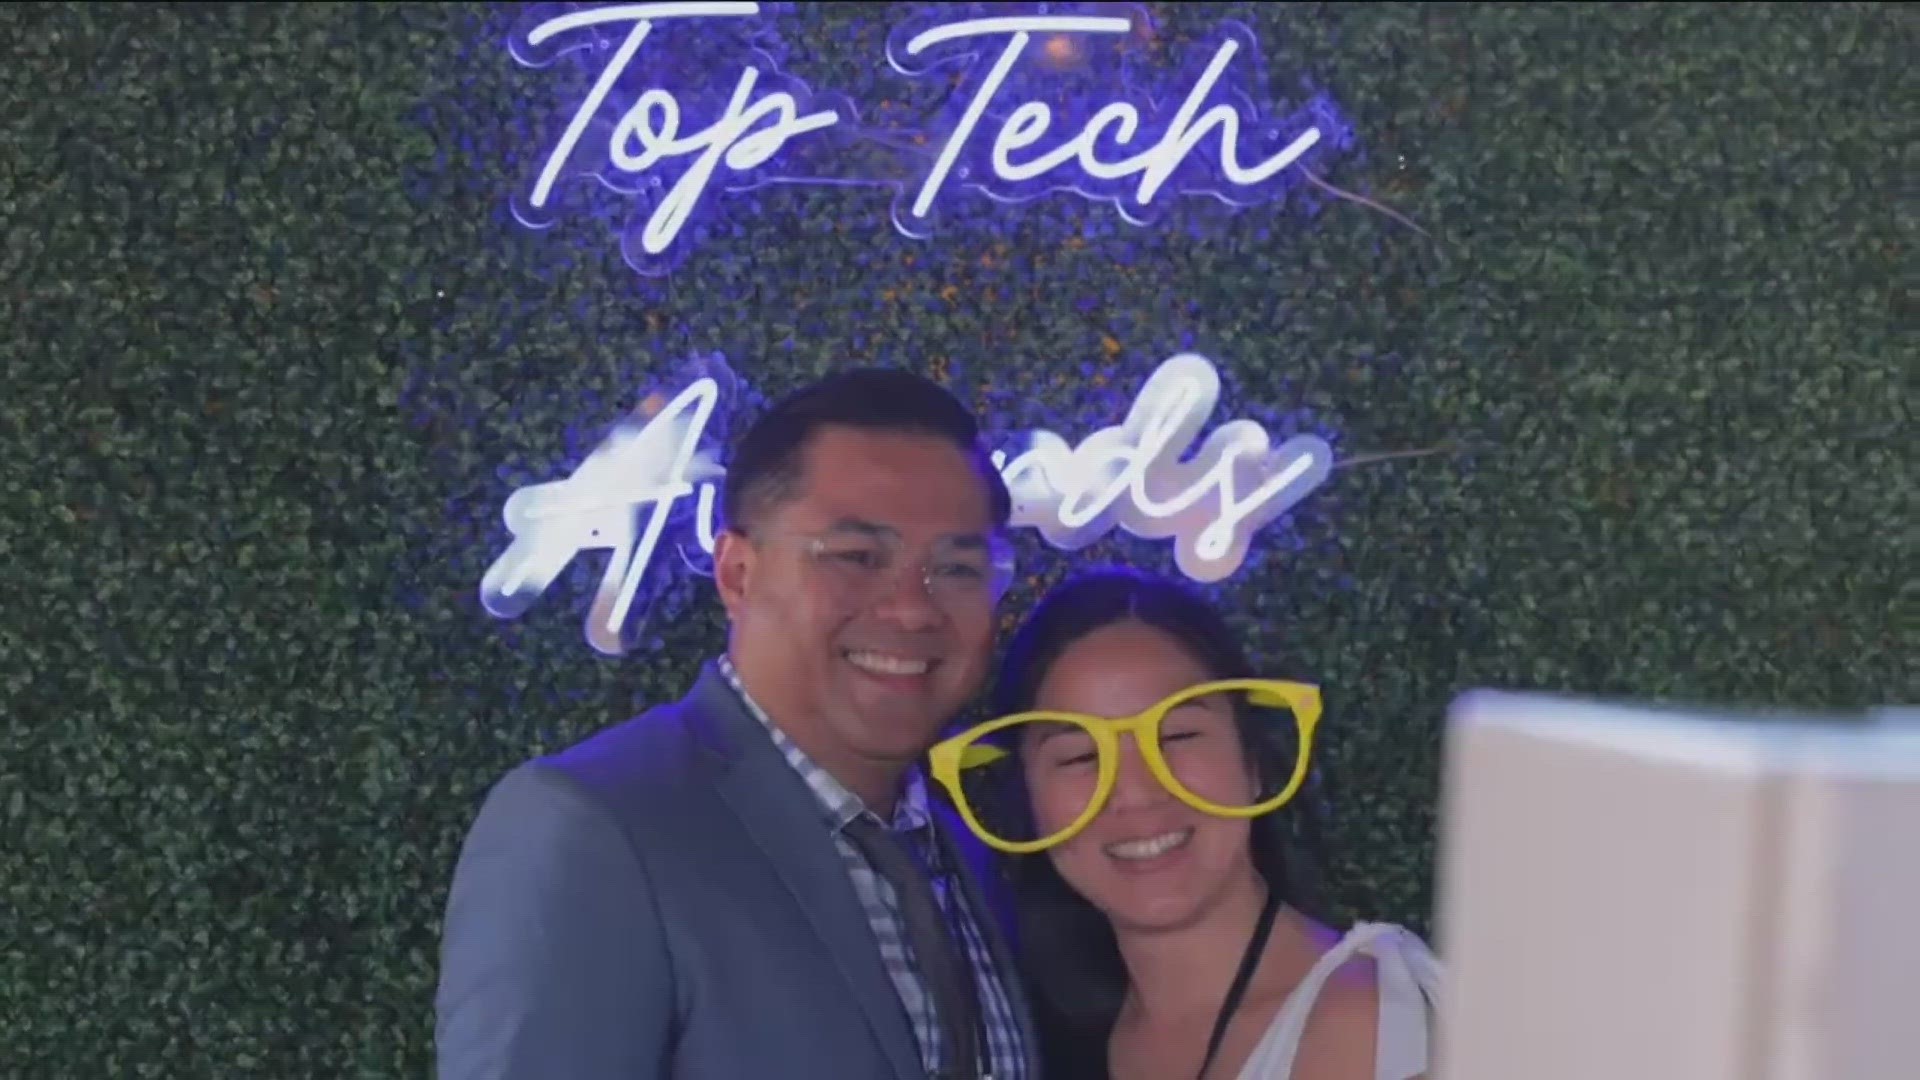 It's the Oscars for the tech industry. Plans are underway for the 16th annual San Diego Top Tech Awards.